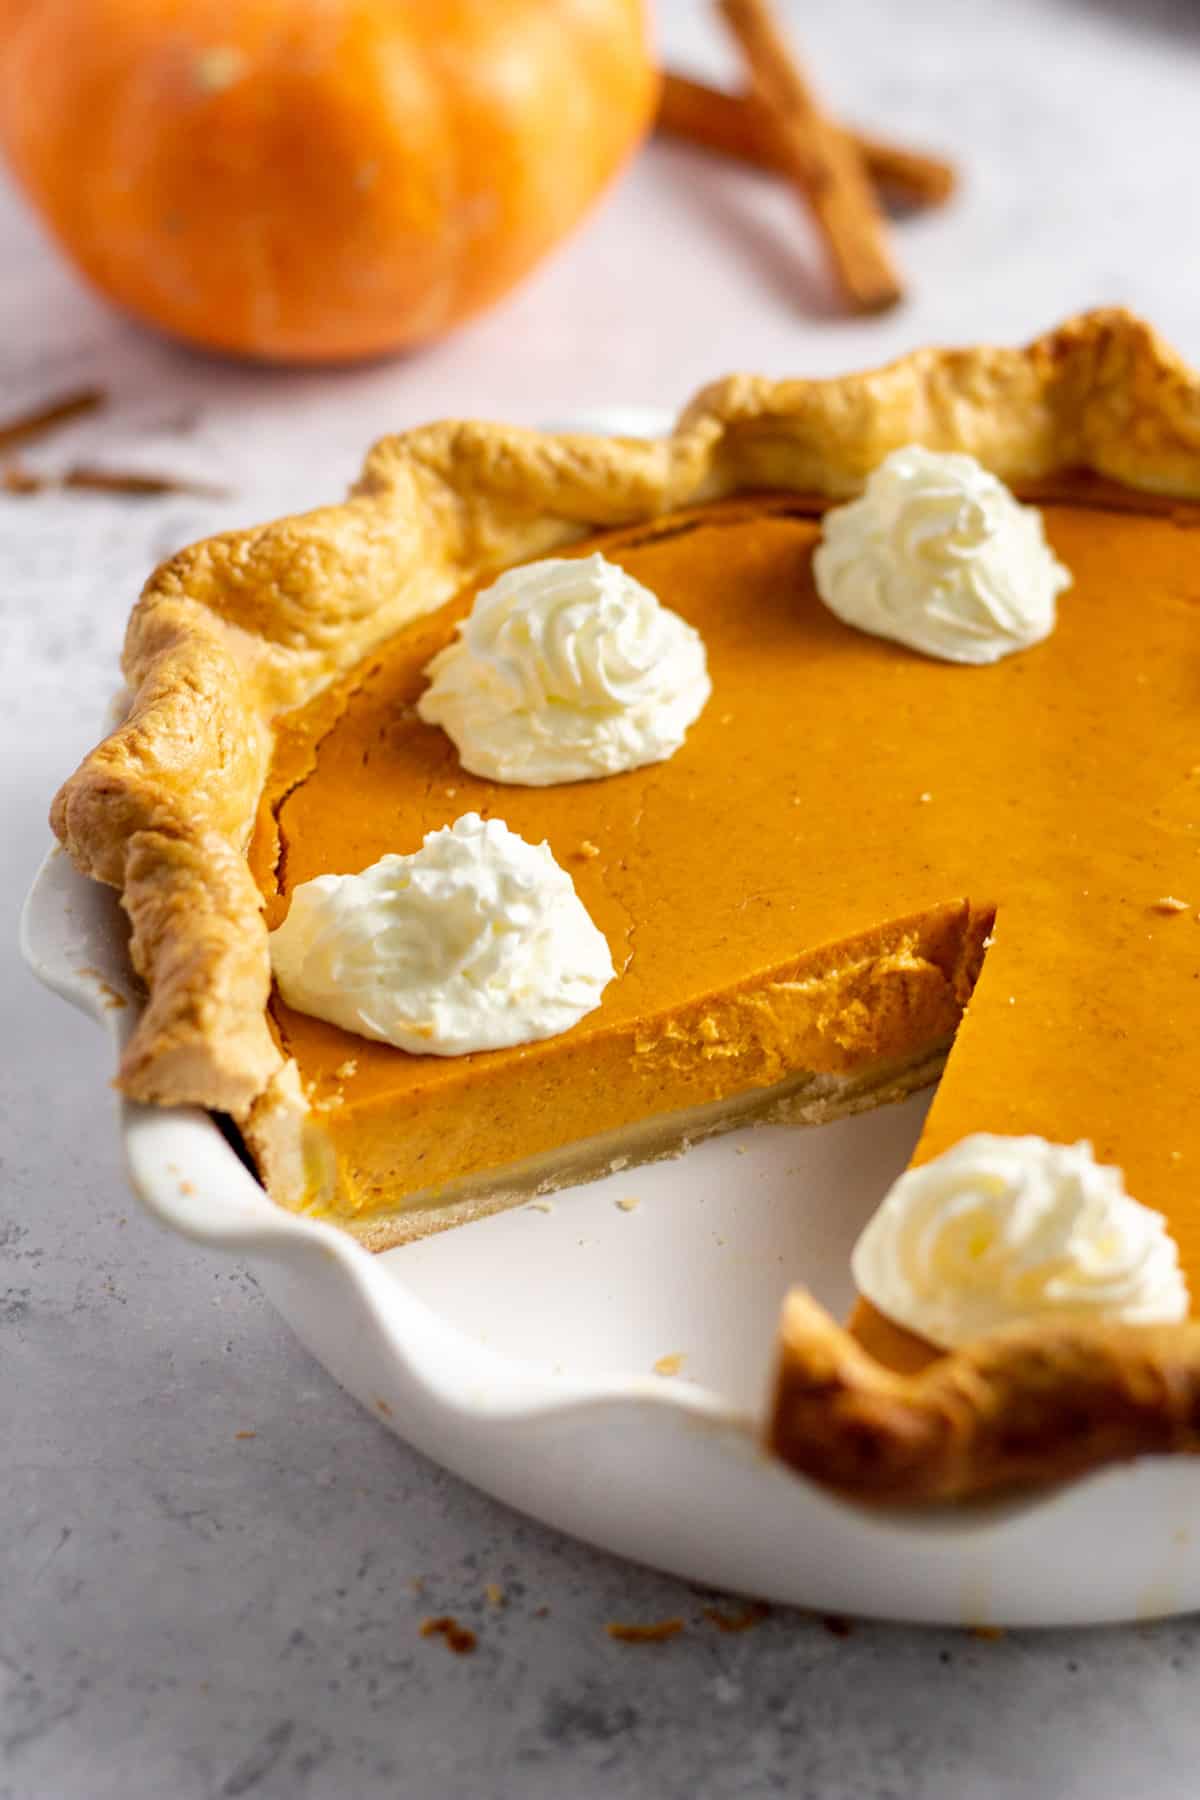 homemade pumpkin pie with homemade crust served in a ceramic pie dish with a whipped cream design and a slice taken out of the pie